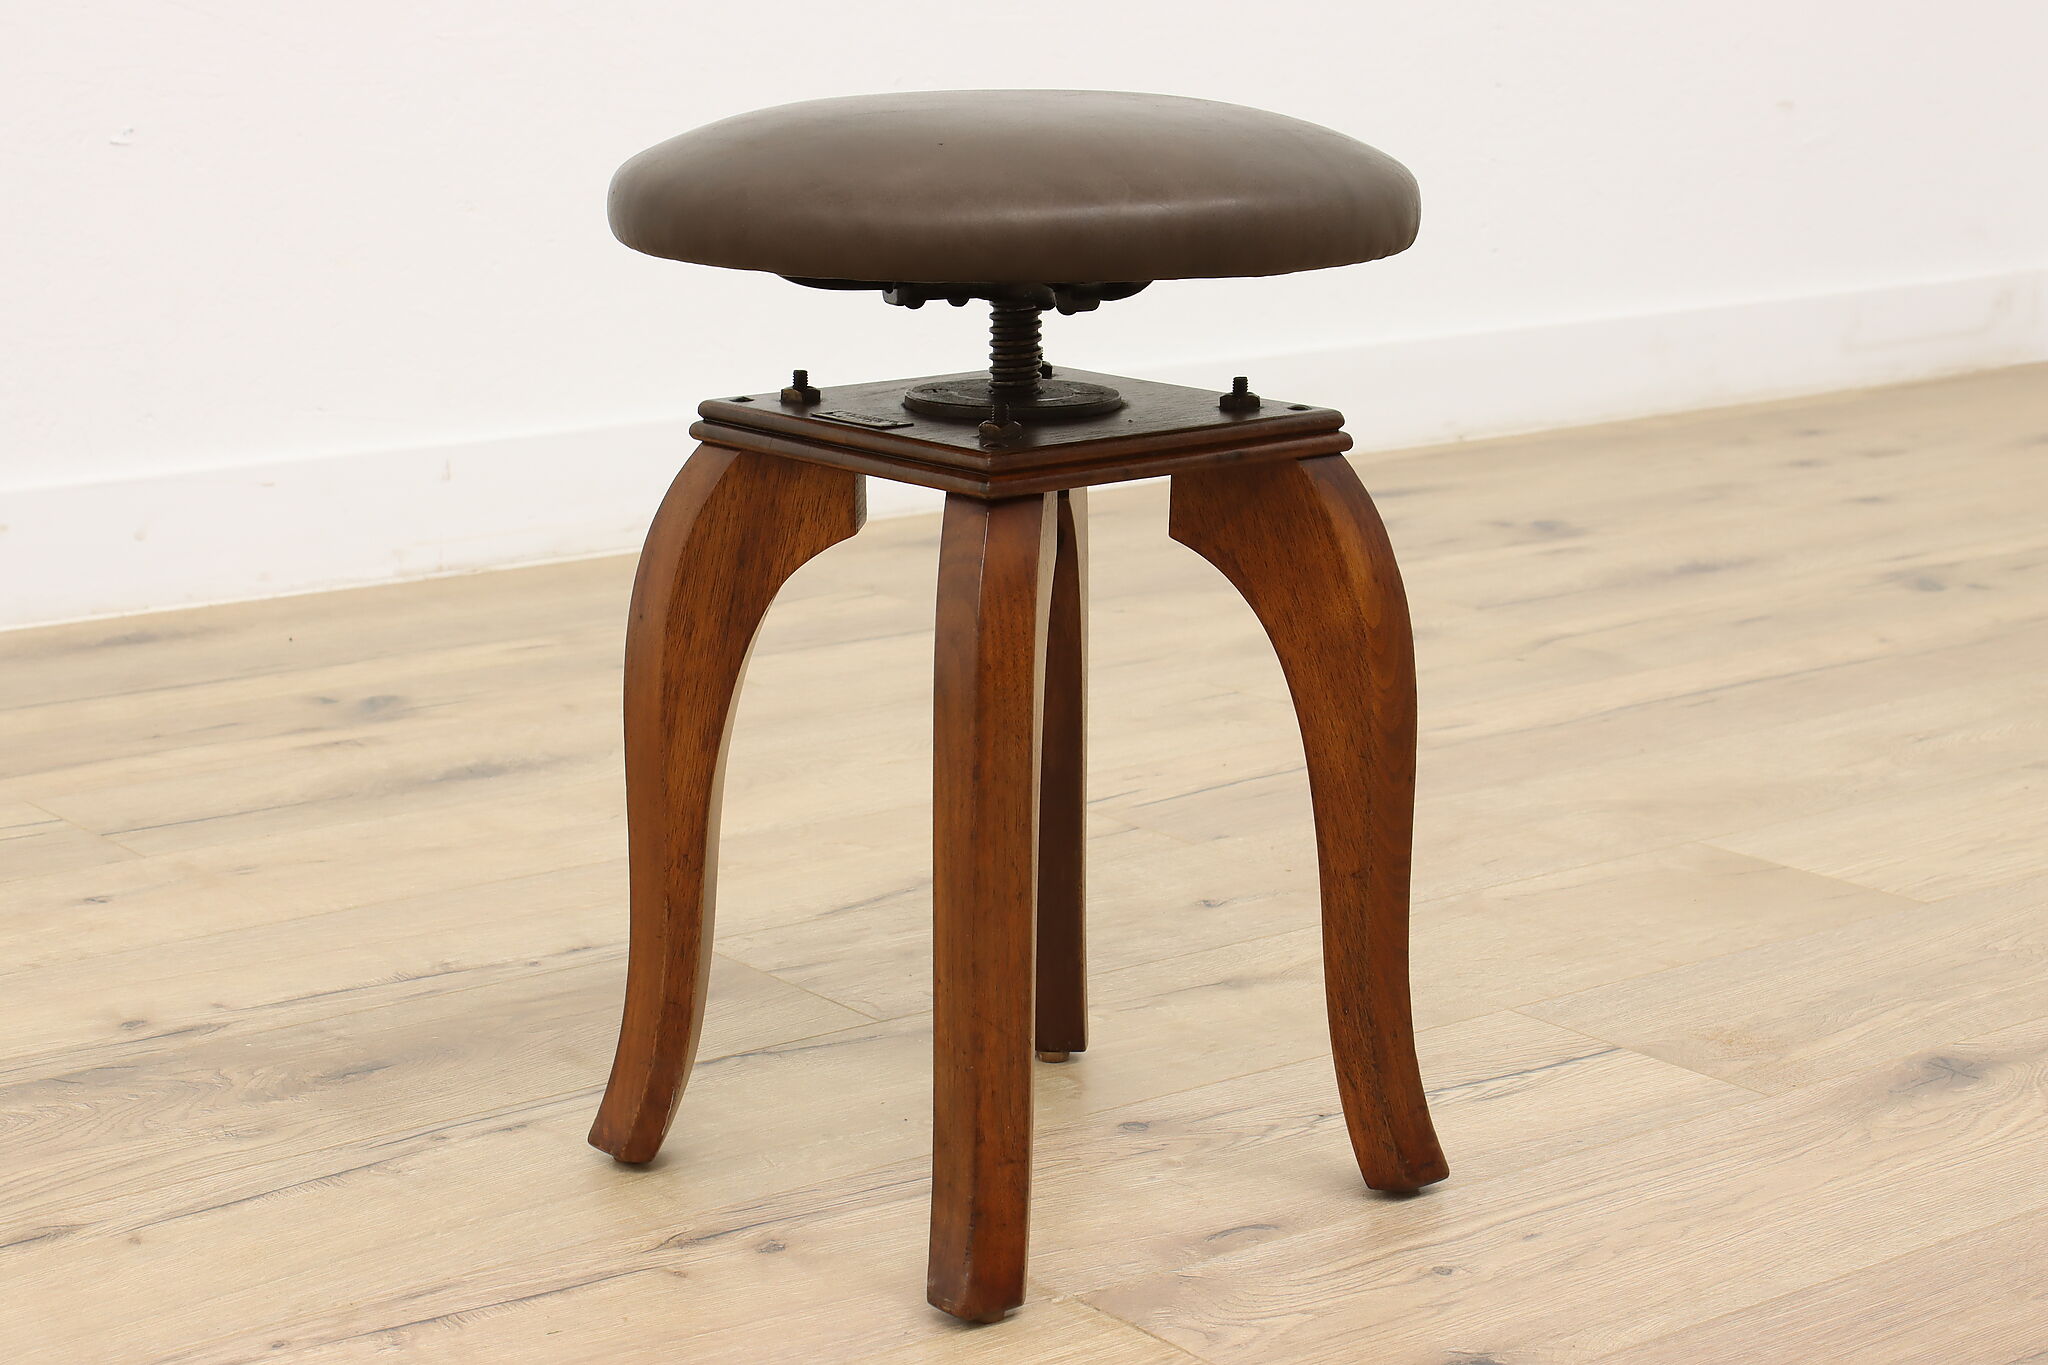 Jewelers Saddle Stool Chair With Tilting Mechanism Adjustable